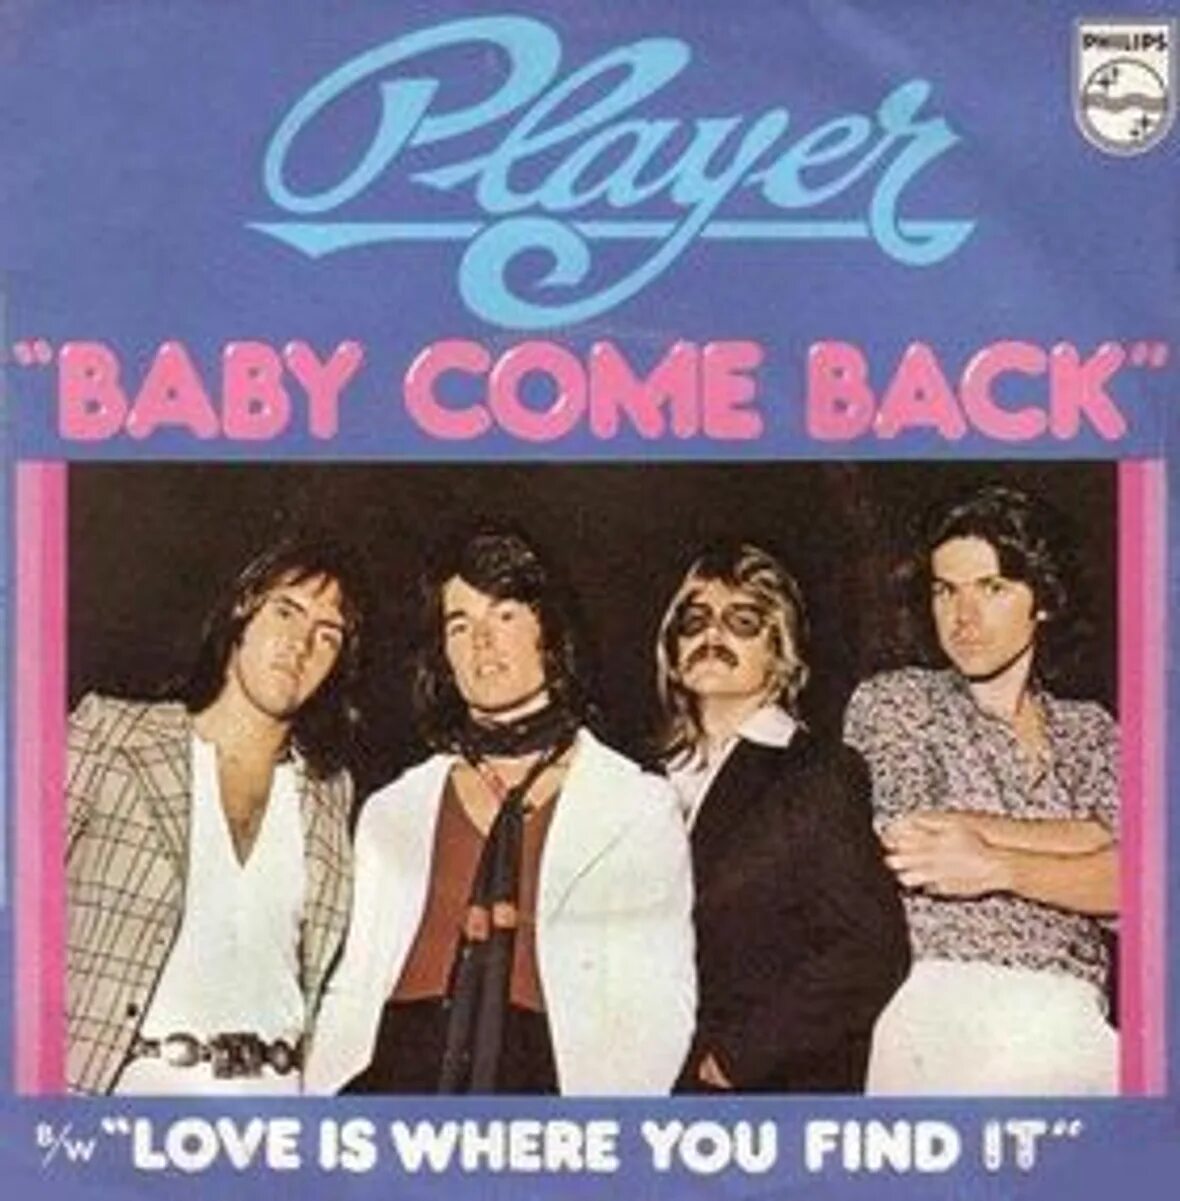 Player Baby come back. Player Baby come back 1977. Baby come back (Player Song). Player Player 1977. Where you come from песня